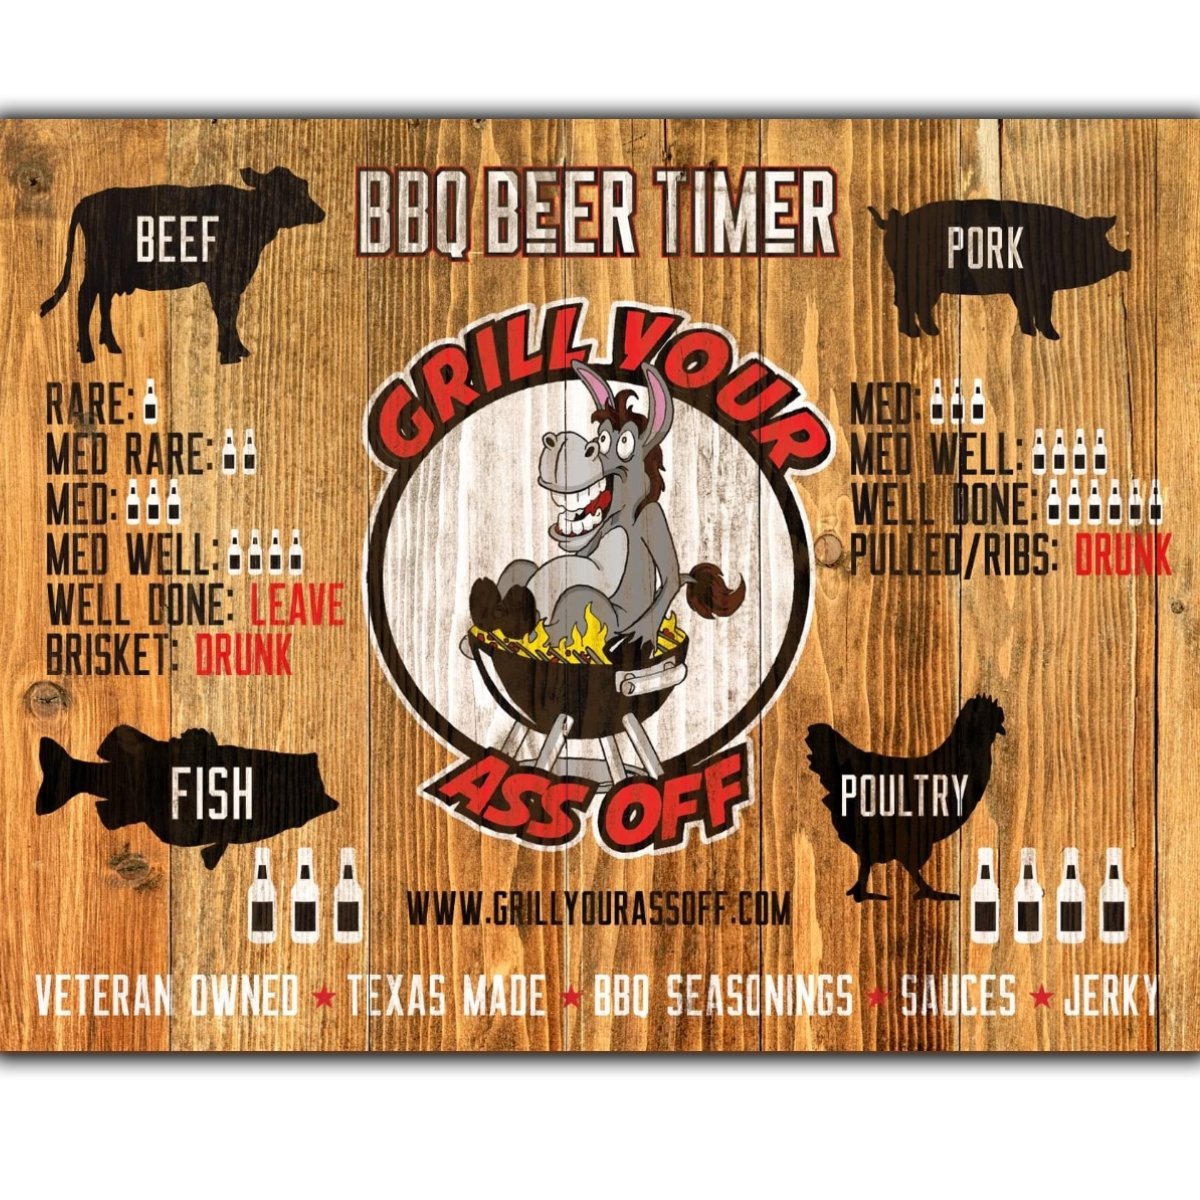 Grill Your Ass Off BBQ Beer Timer Magnet